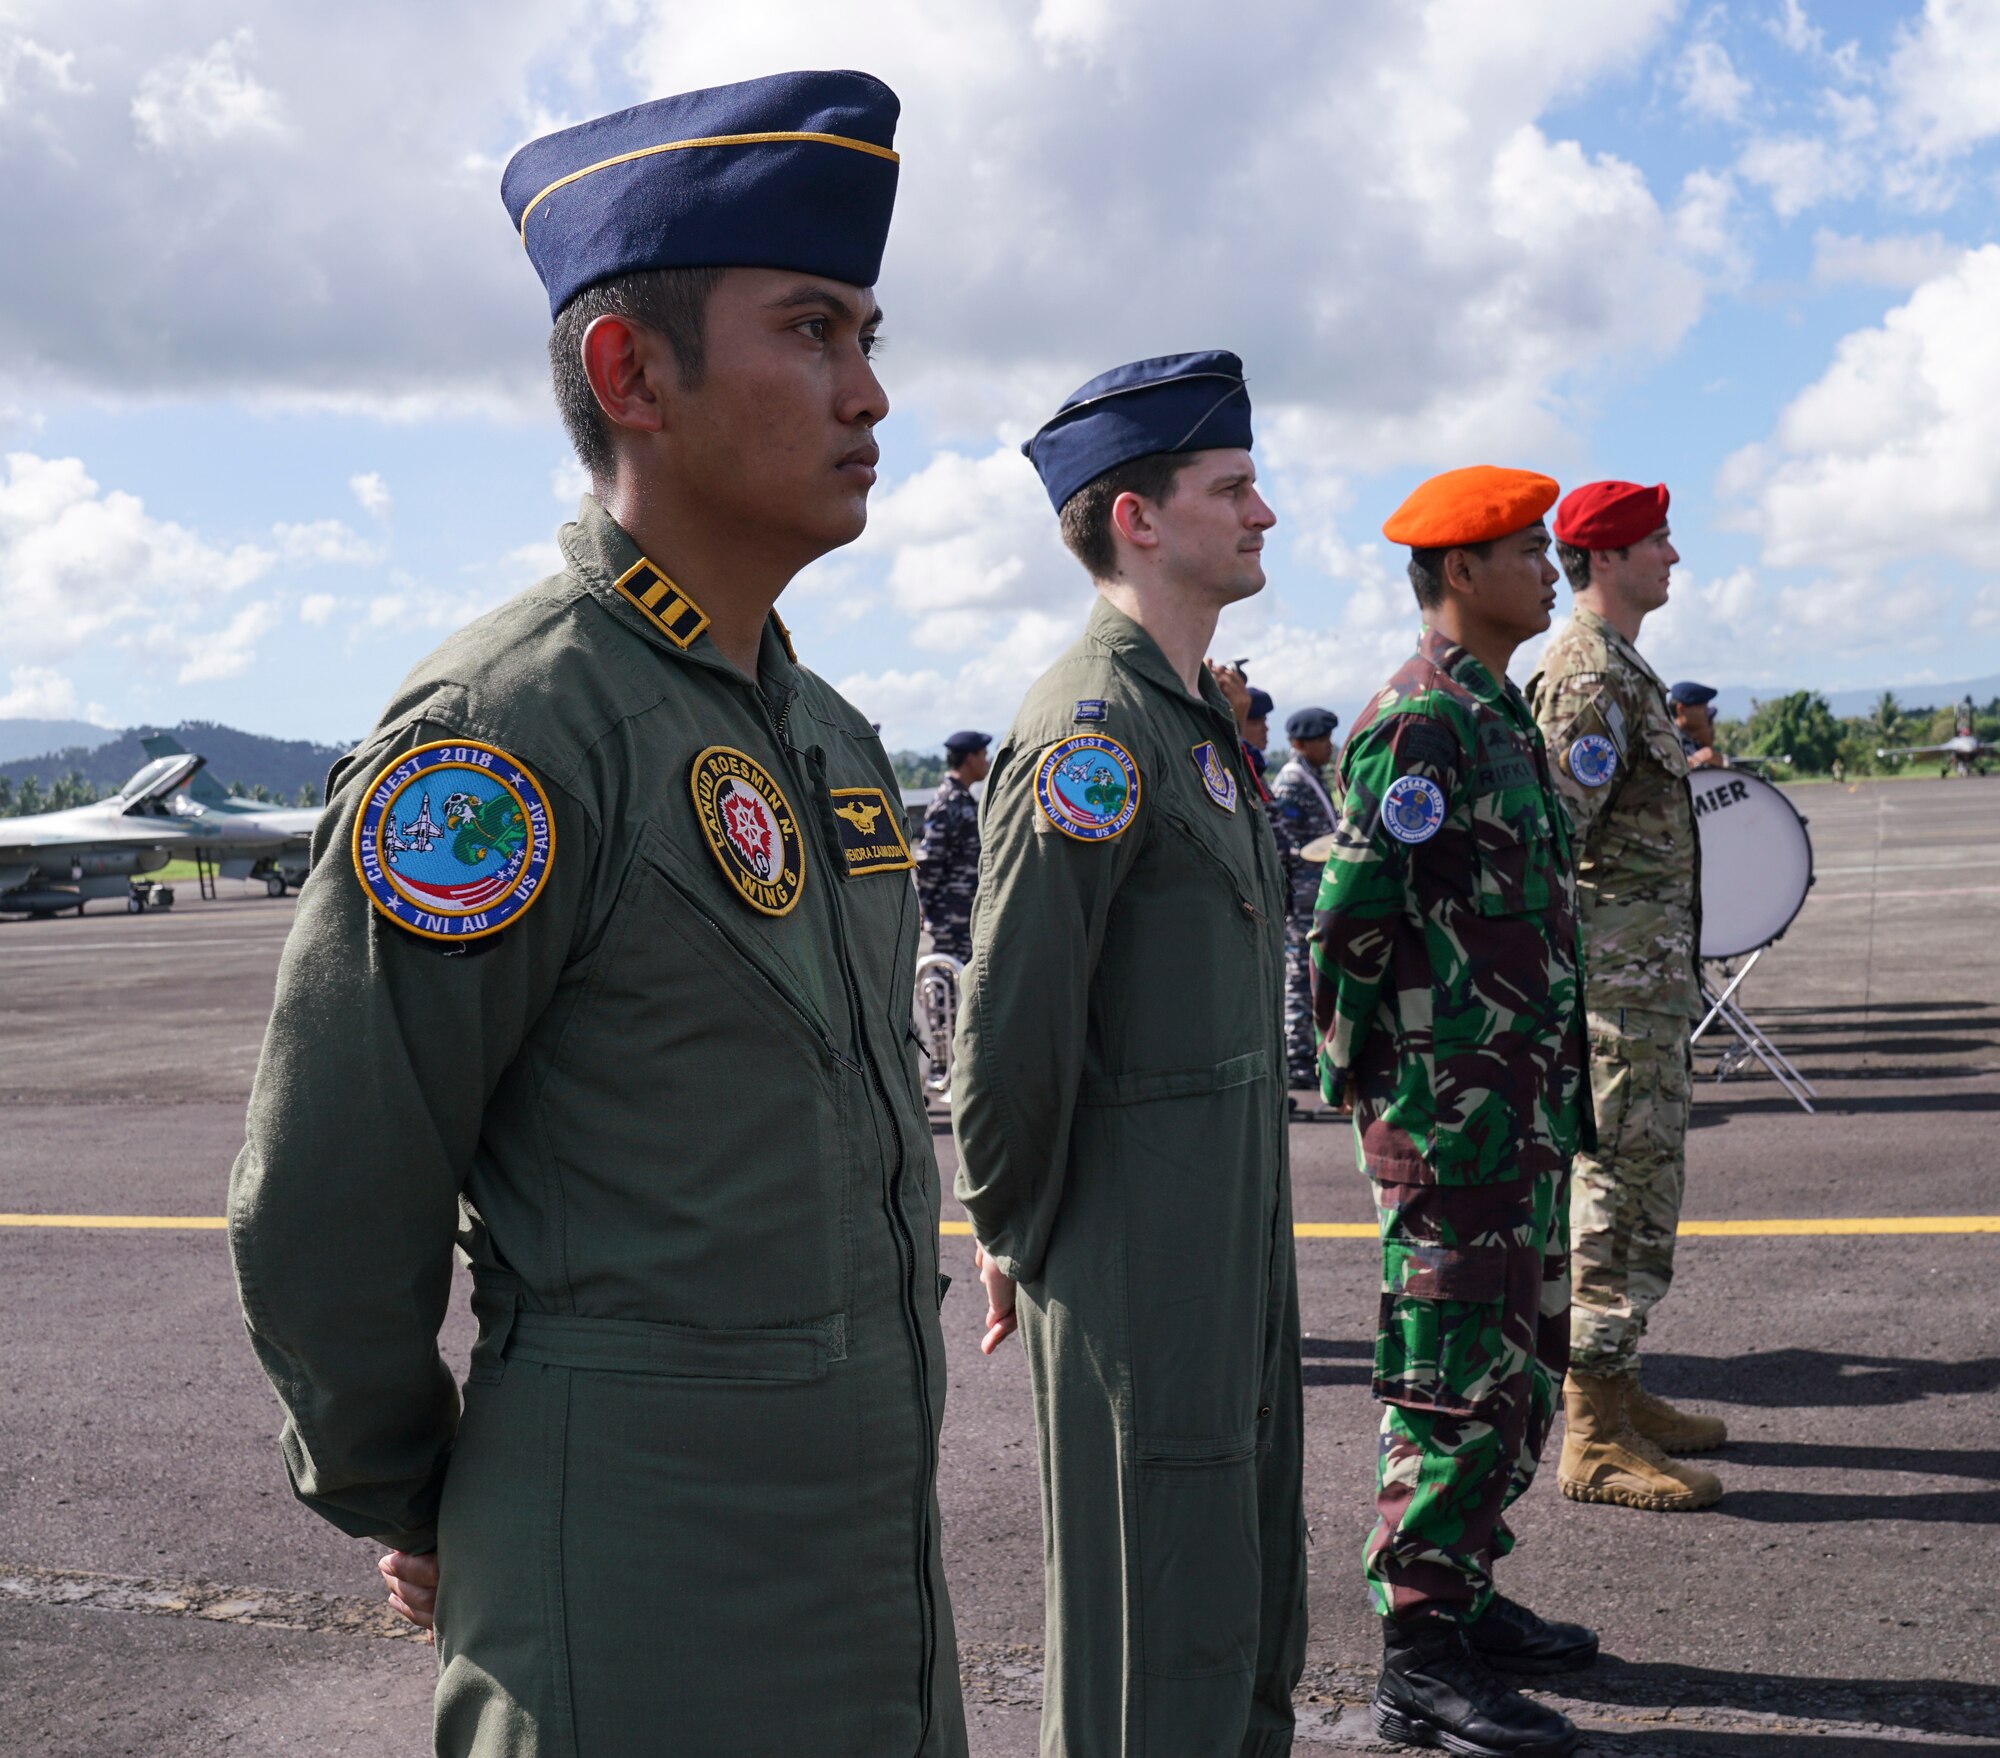 Members from the U.S. Air Force and Indonesian military participate in the exercise Cope West 18 (CW18) opening ceremony at Sam Ratulangi International Airport, Indonesia, March 12, 2018.